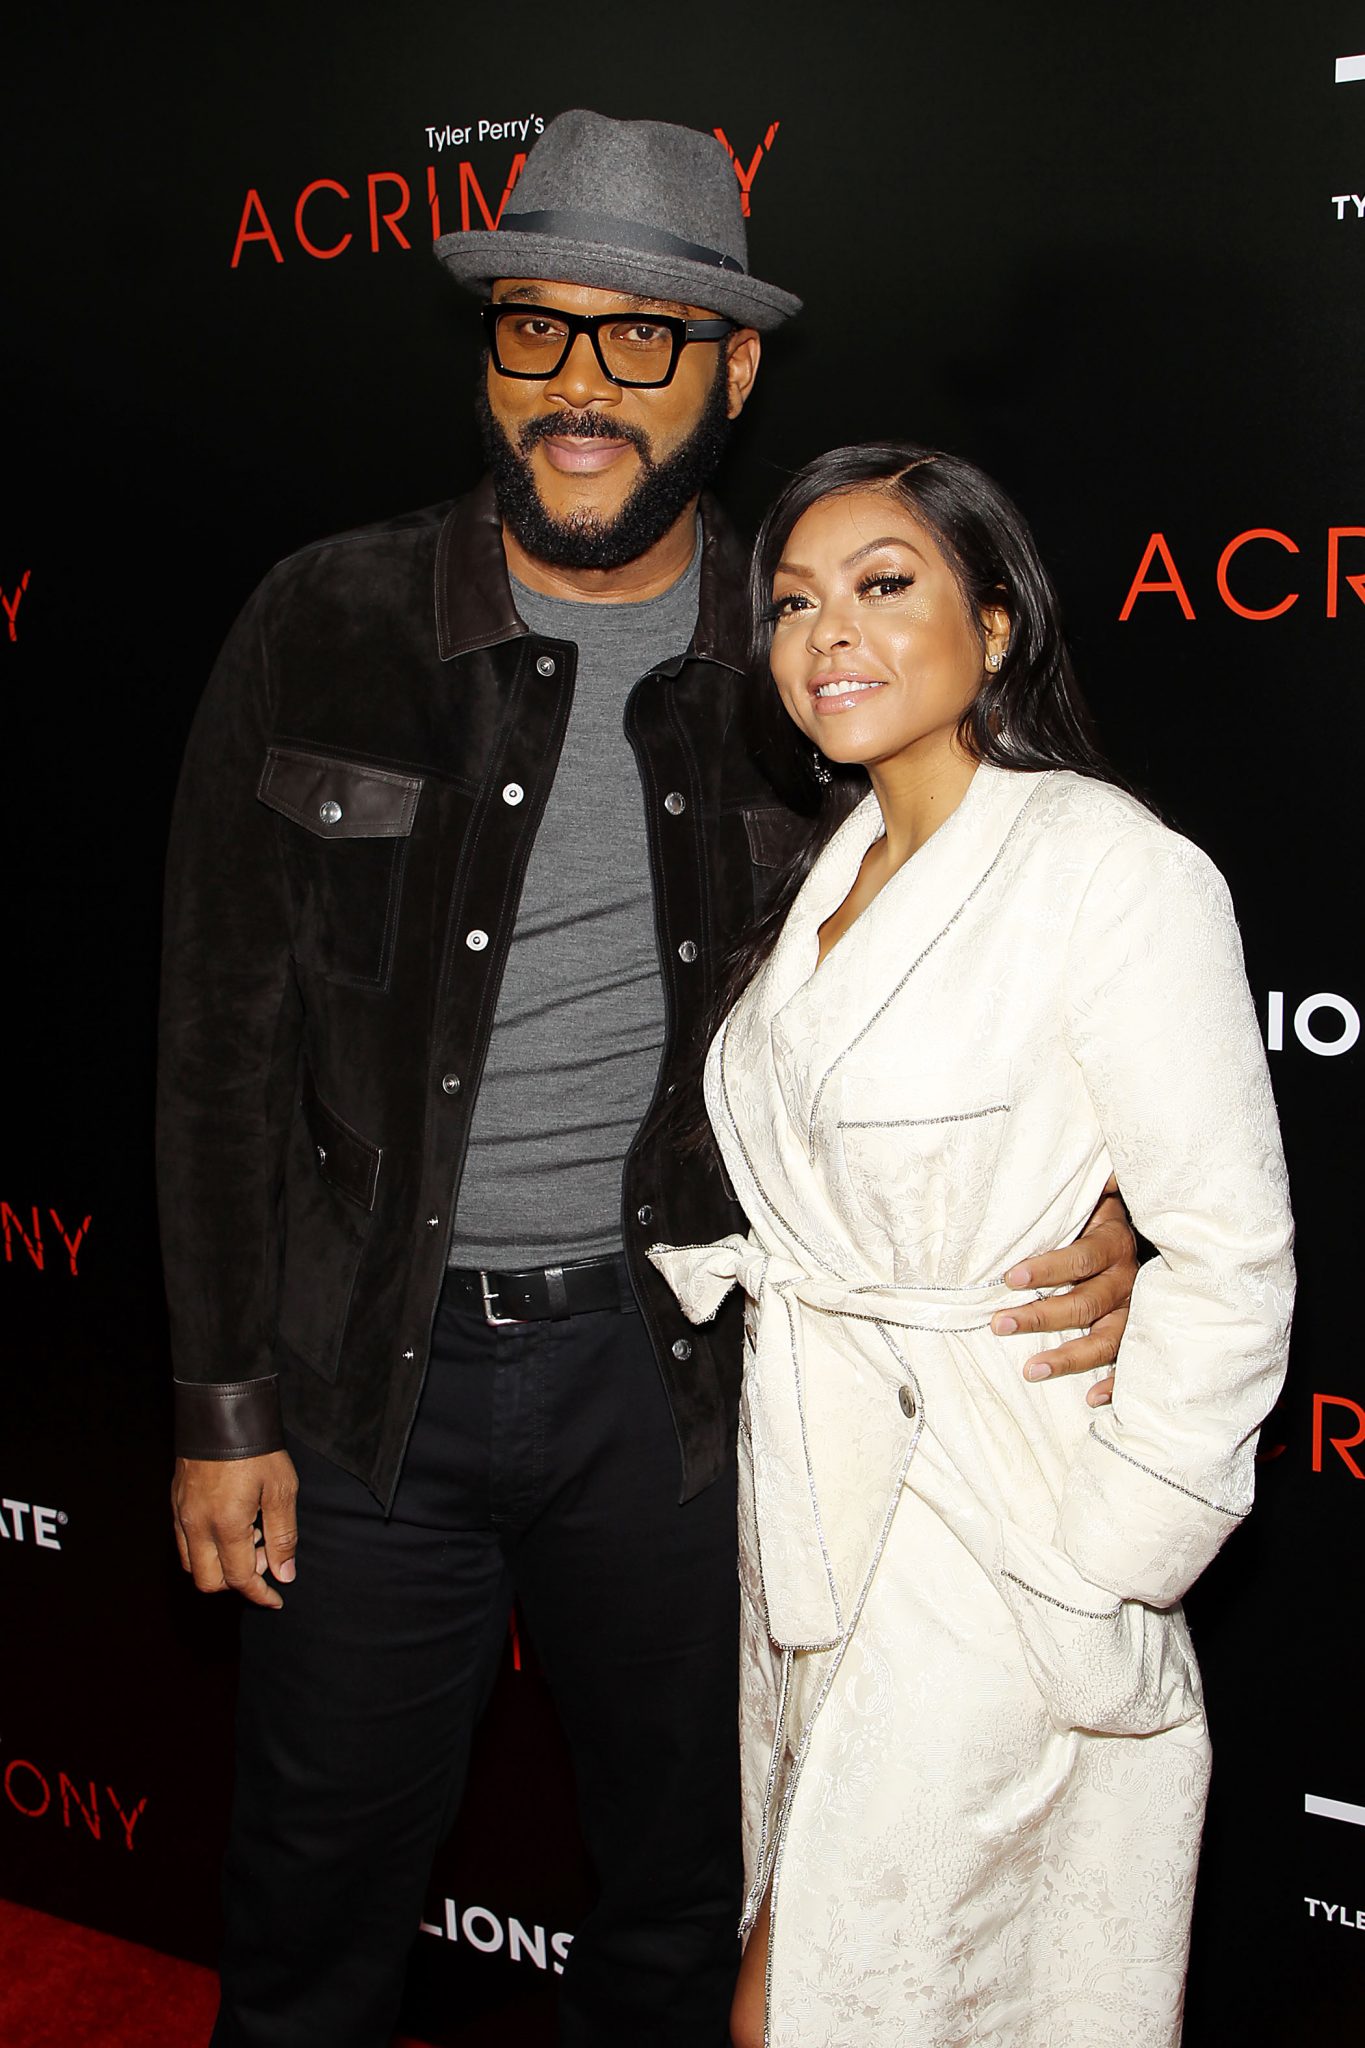 Tyler Perry’s Acrimony World Premiere In NYC